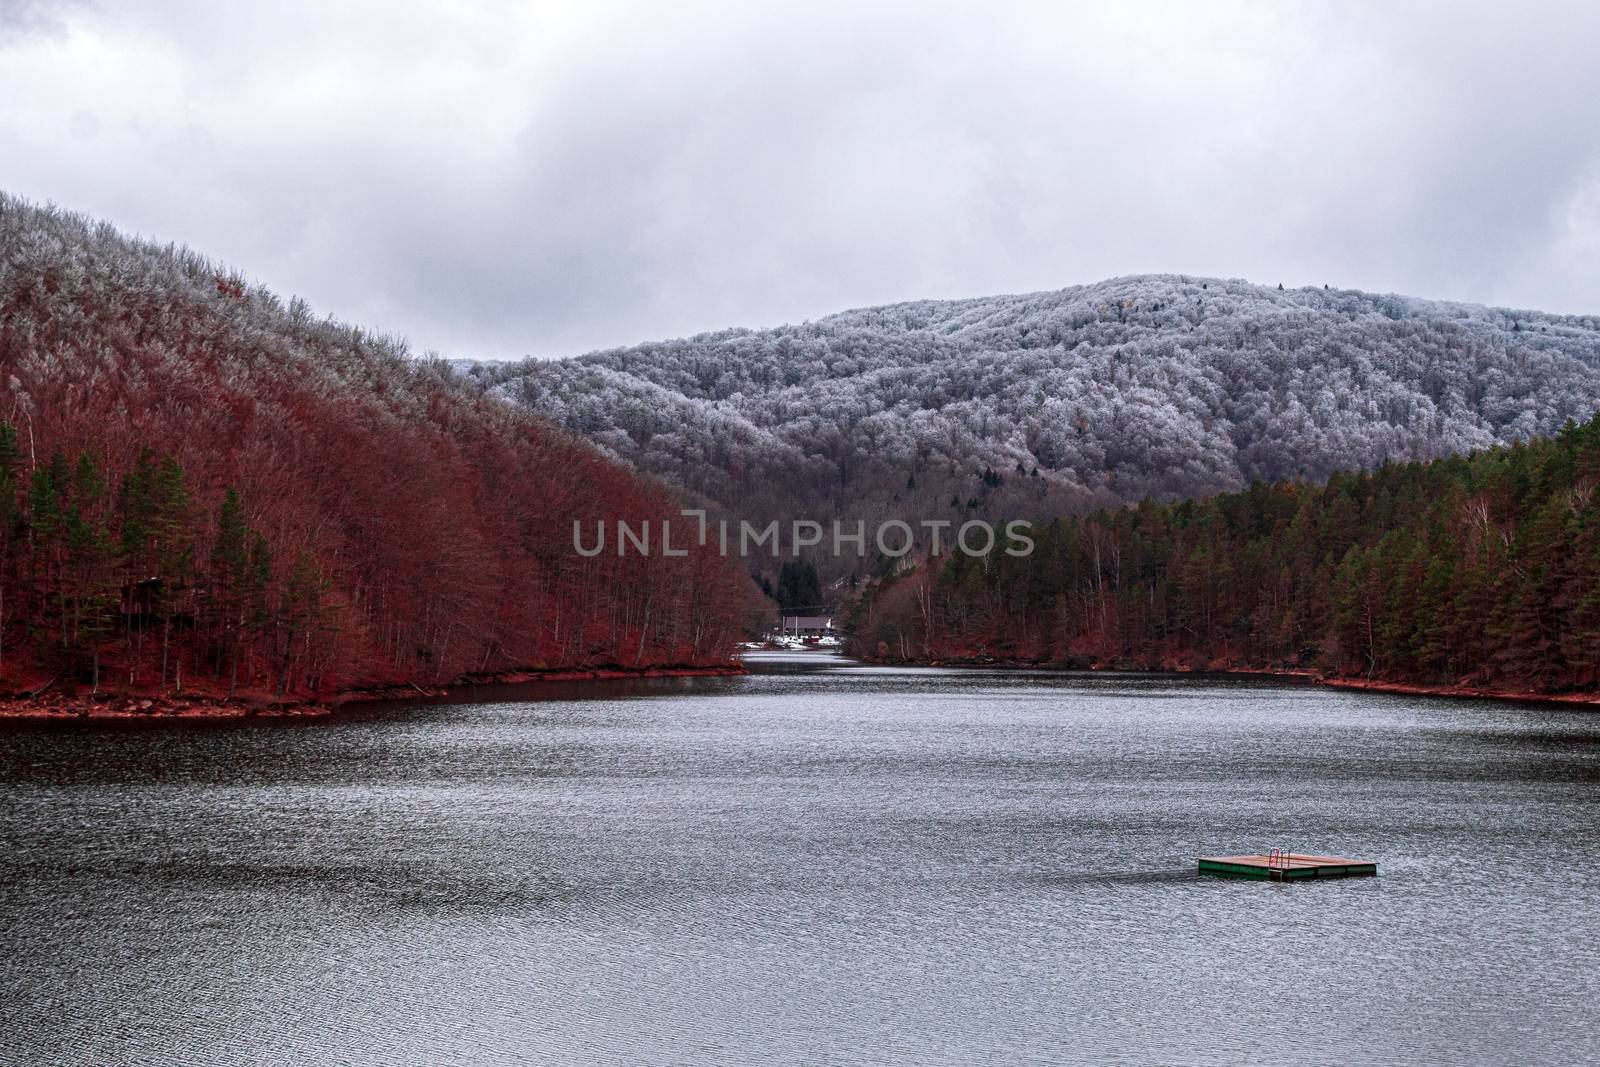 A frozen lake, surrounded by two forests of different colors, in a city in Romania called Valiug